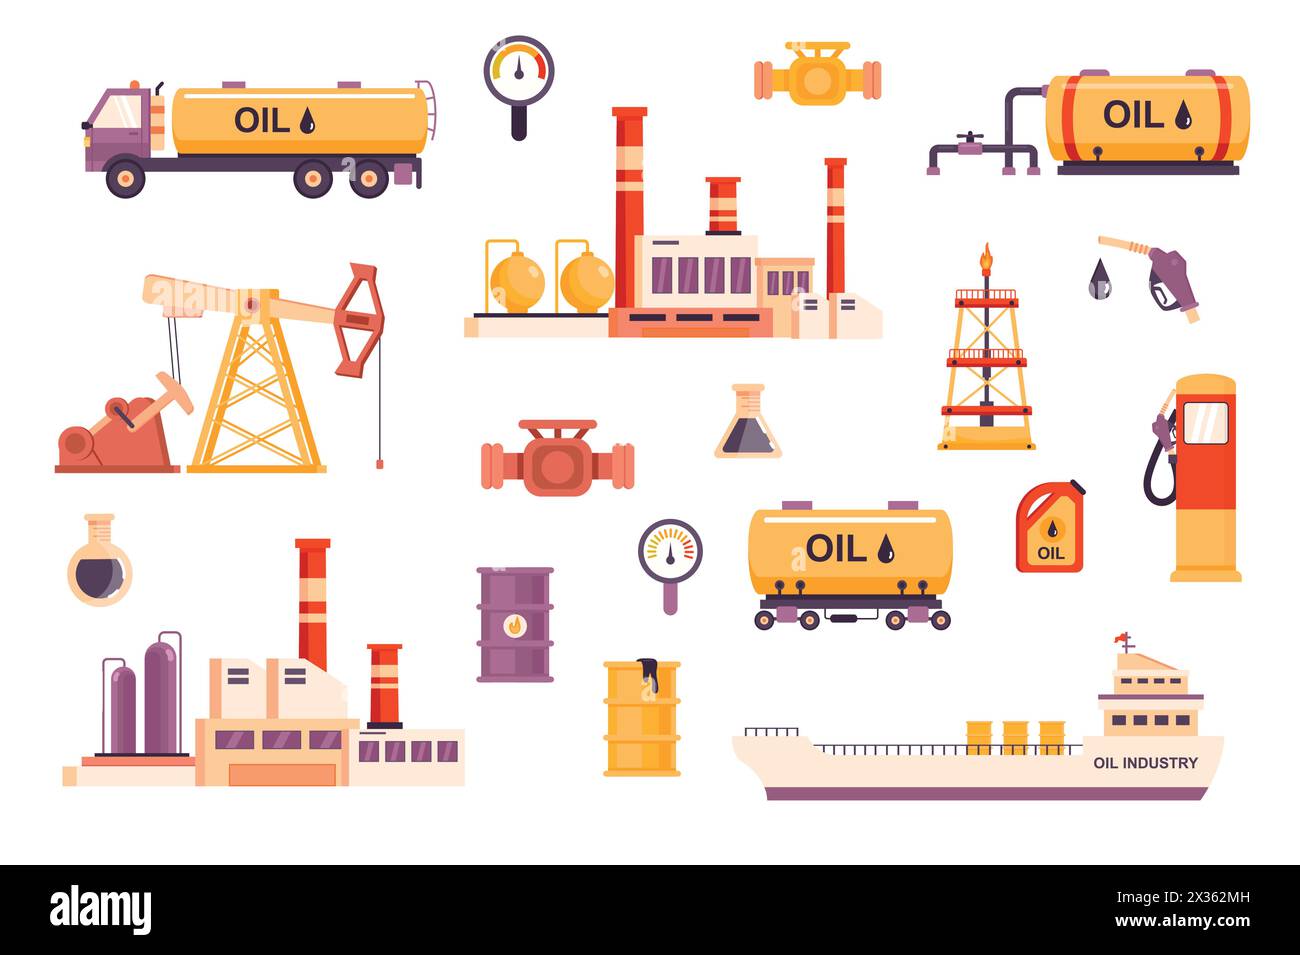 Oil industry bundle of flat scenes. Fuel production isolated set. Drilling rig, factory, oil tanker ship, fuel truck, tank car, pumpjack, gas station, Stock Vector